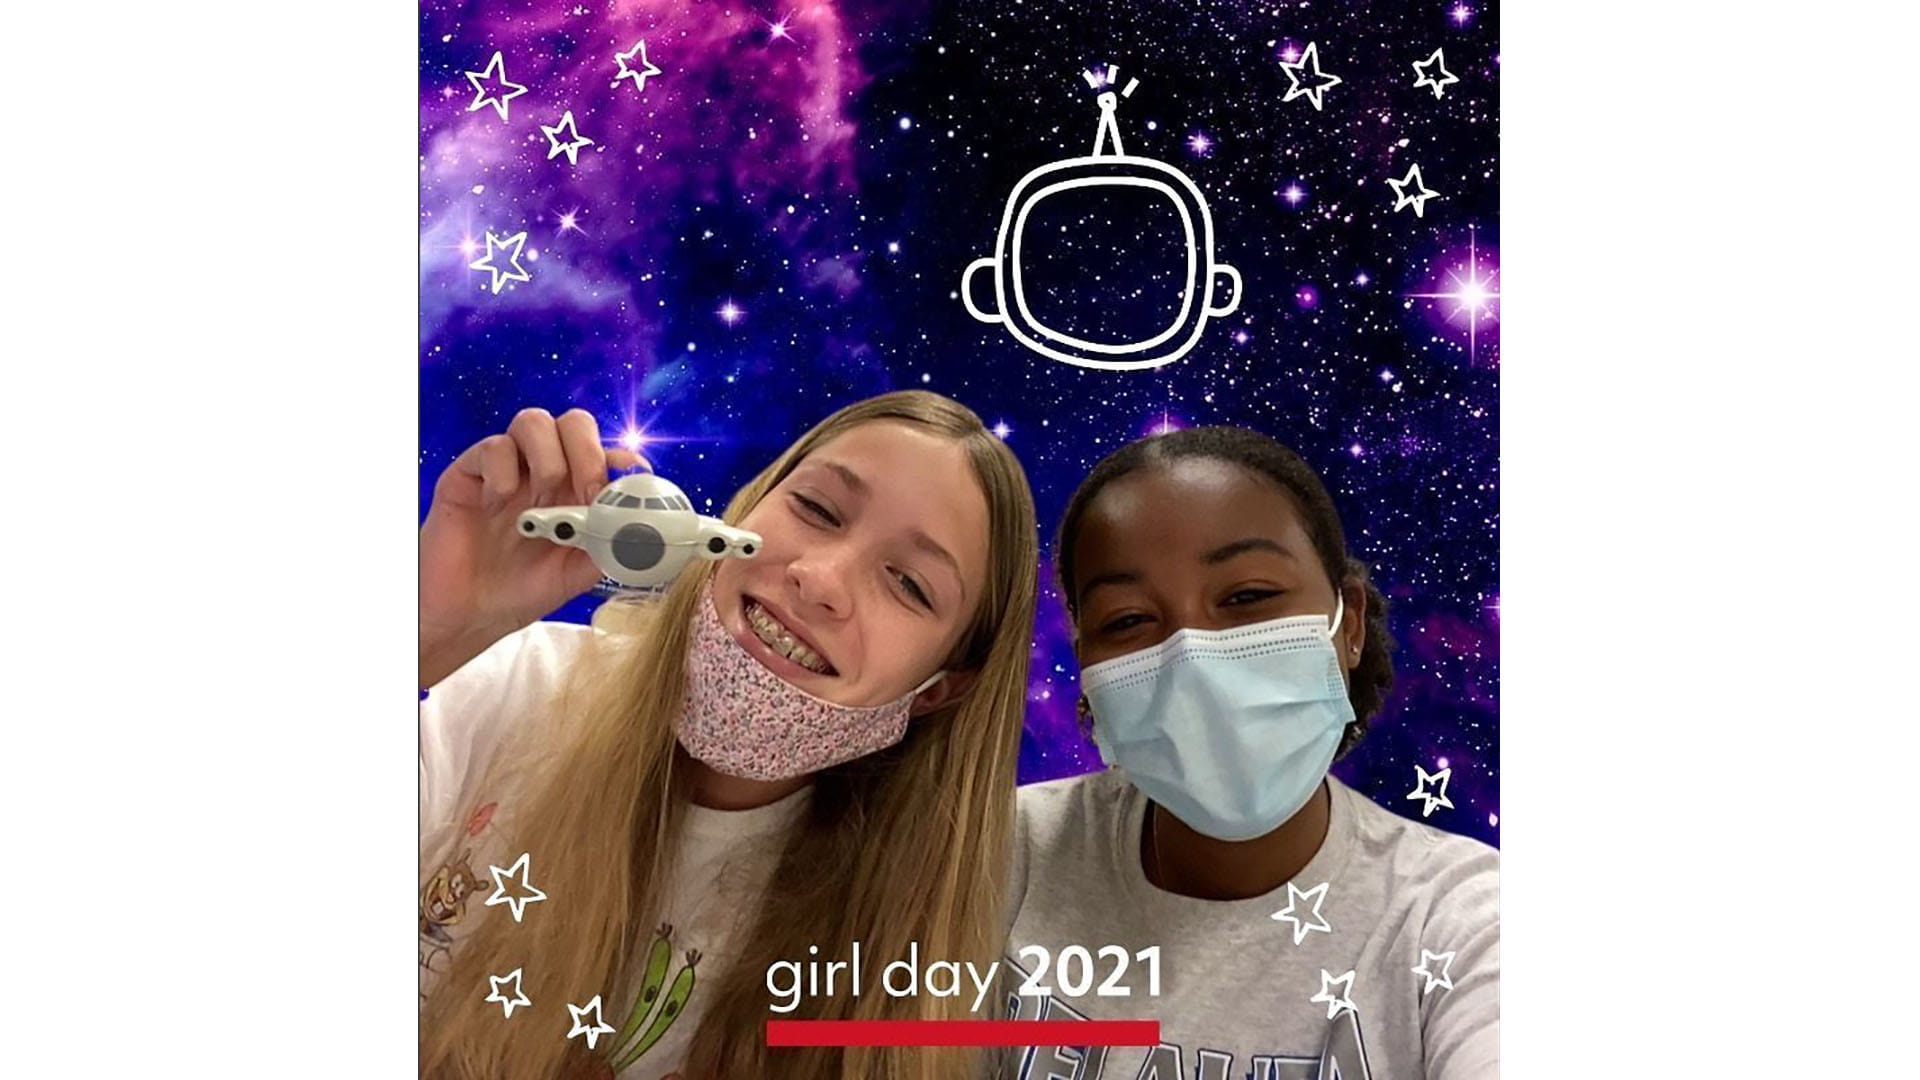 Girl Day 2021 ad